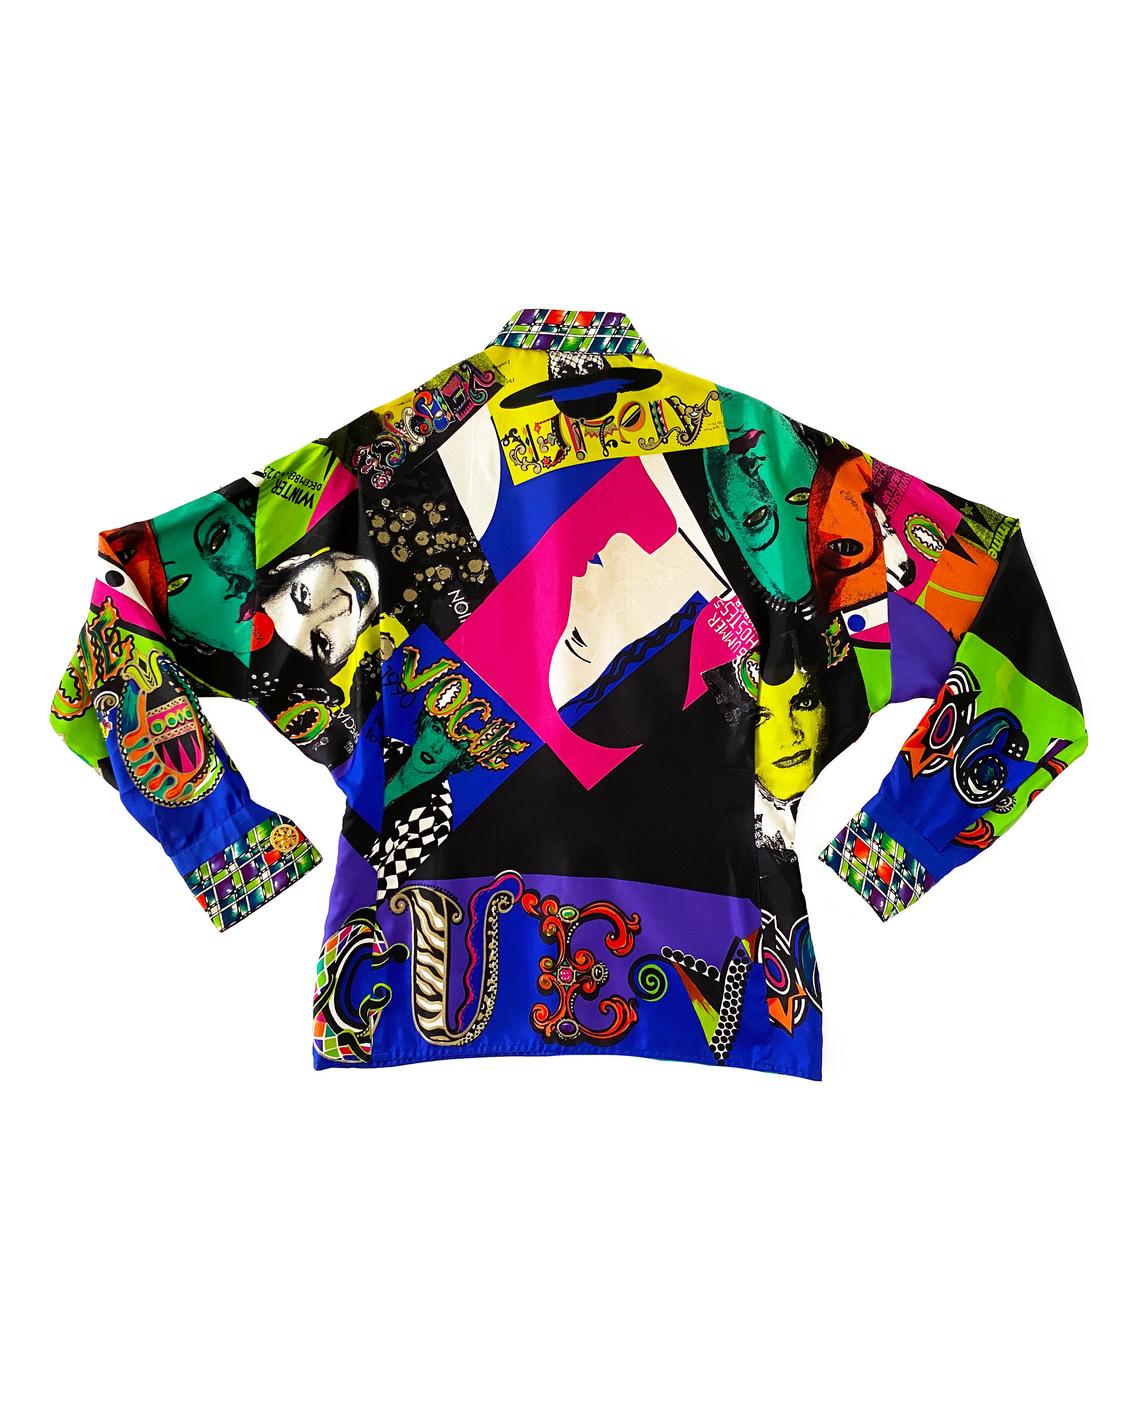 FRUIT Vintage Gianni Versace rare Vogue print silk shirt from the Spring 1991 collection. This is a very special, museum worthy piece! It features the iconic Vogue print in large scale all over and gold feature buttons on collar and cuff.